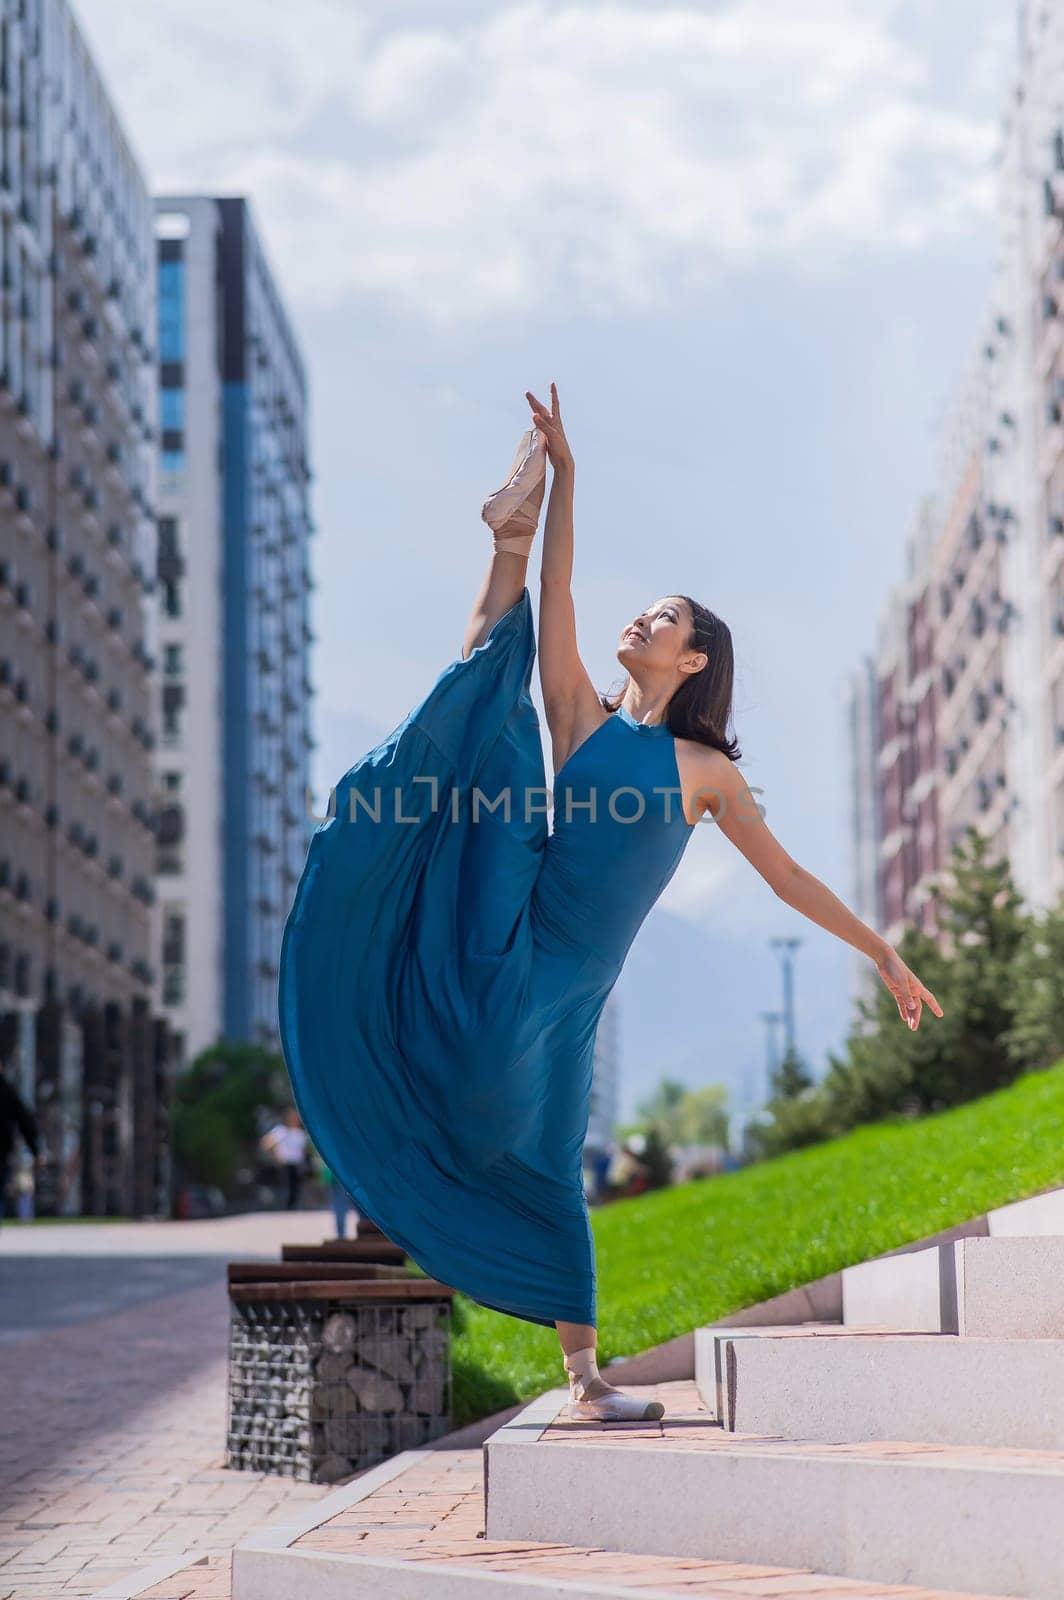 Beautiful Asian ballerina in a blue dress stands on the stairs in the splits outdoors. Urban landscape. Vertical photo